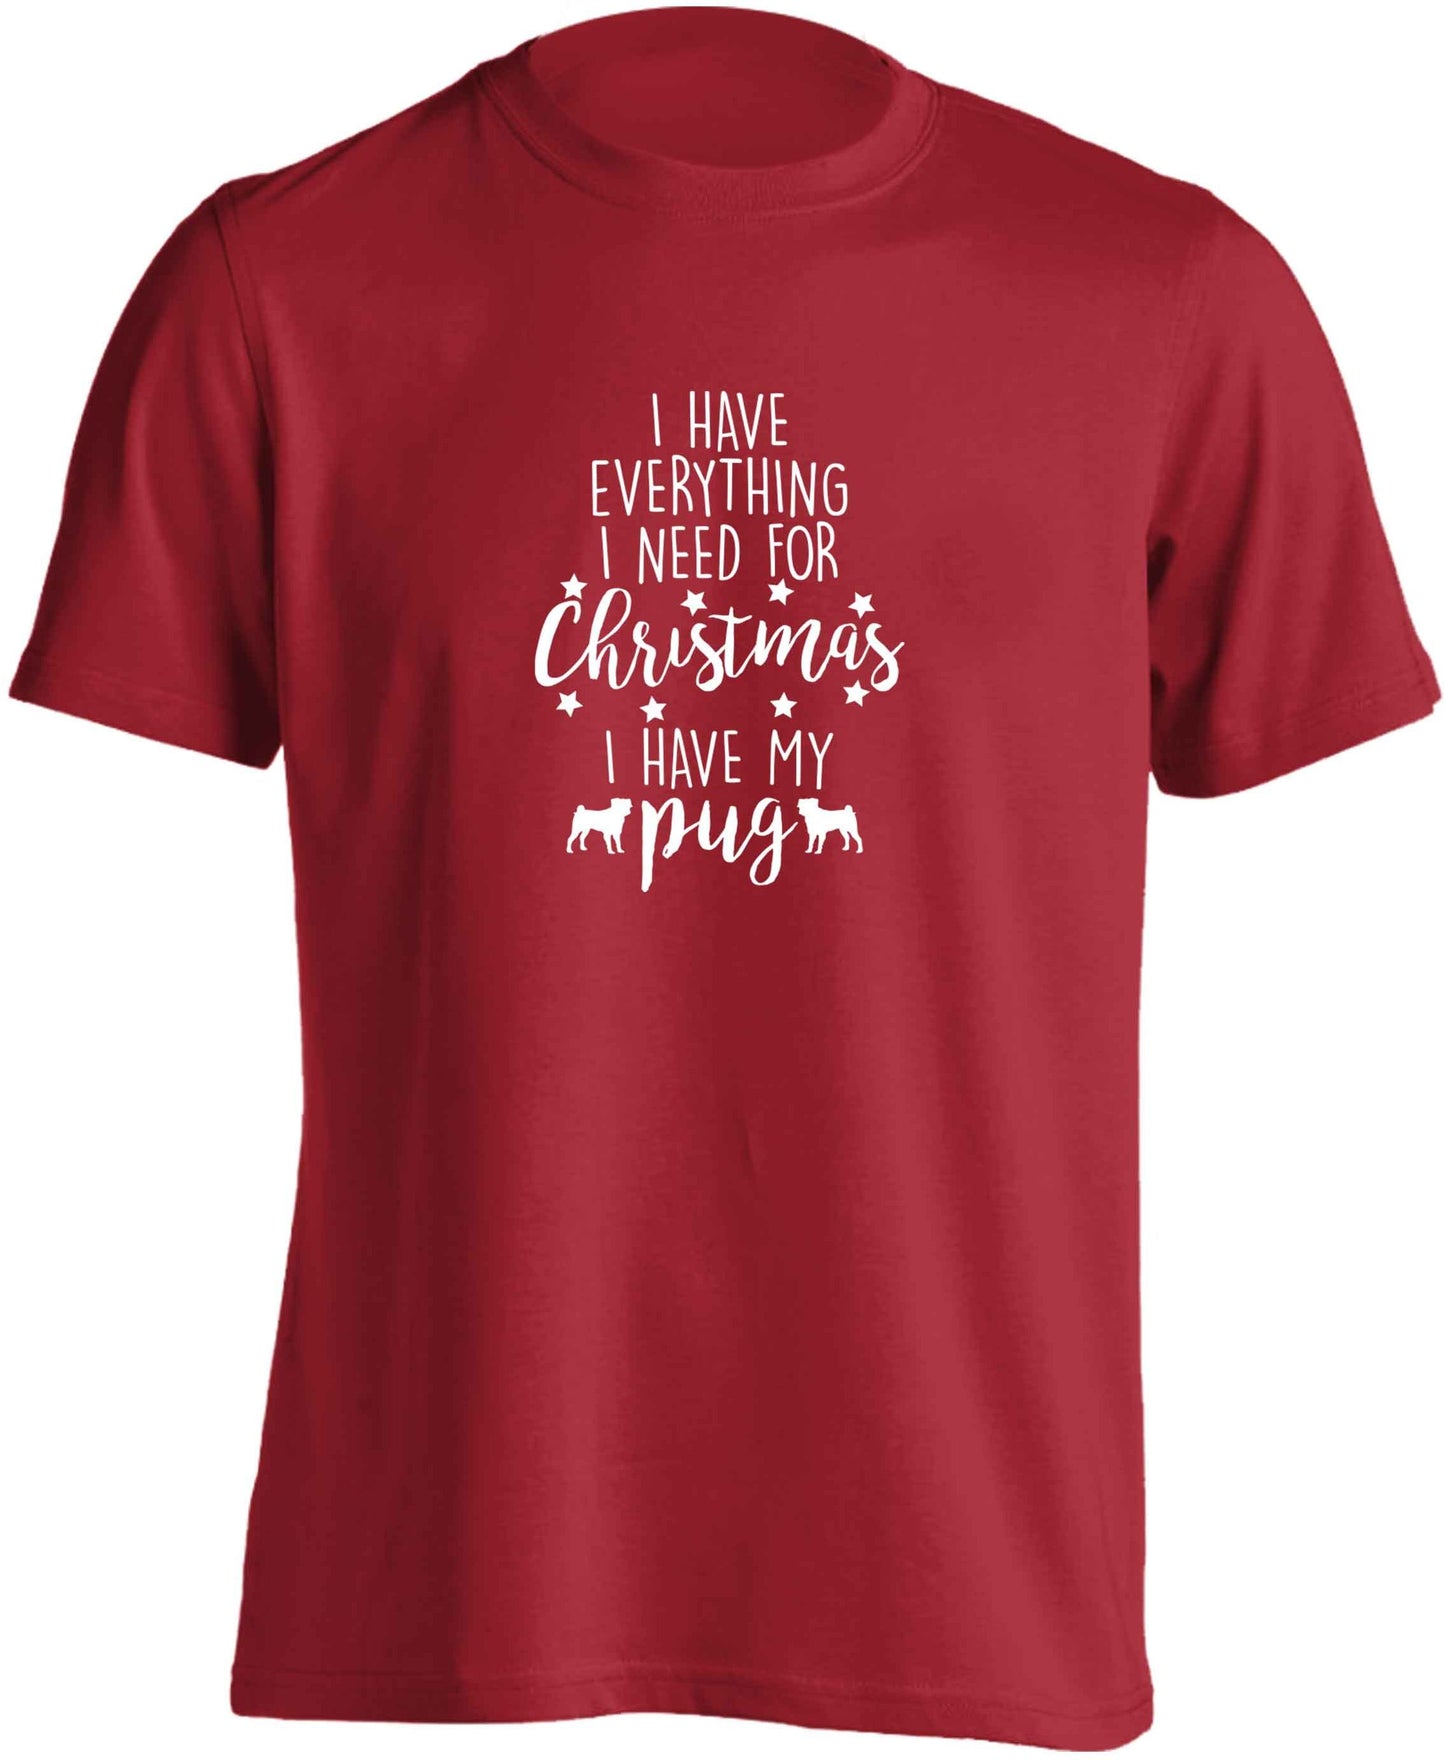 I have everything I need for Christmas I have my pug adults unisex red Tshirt 2XL